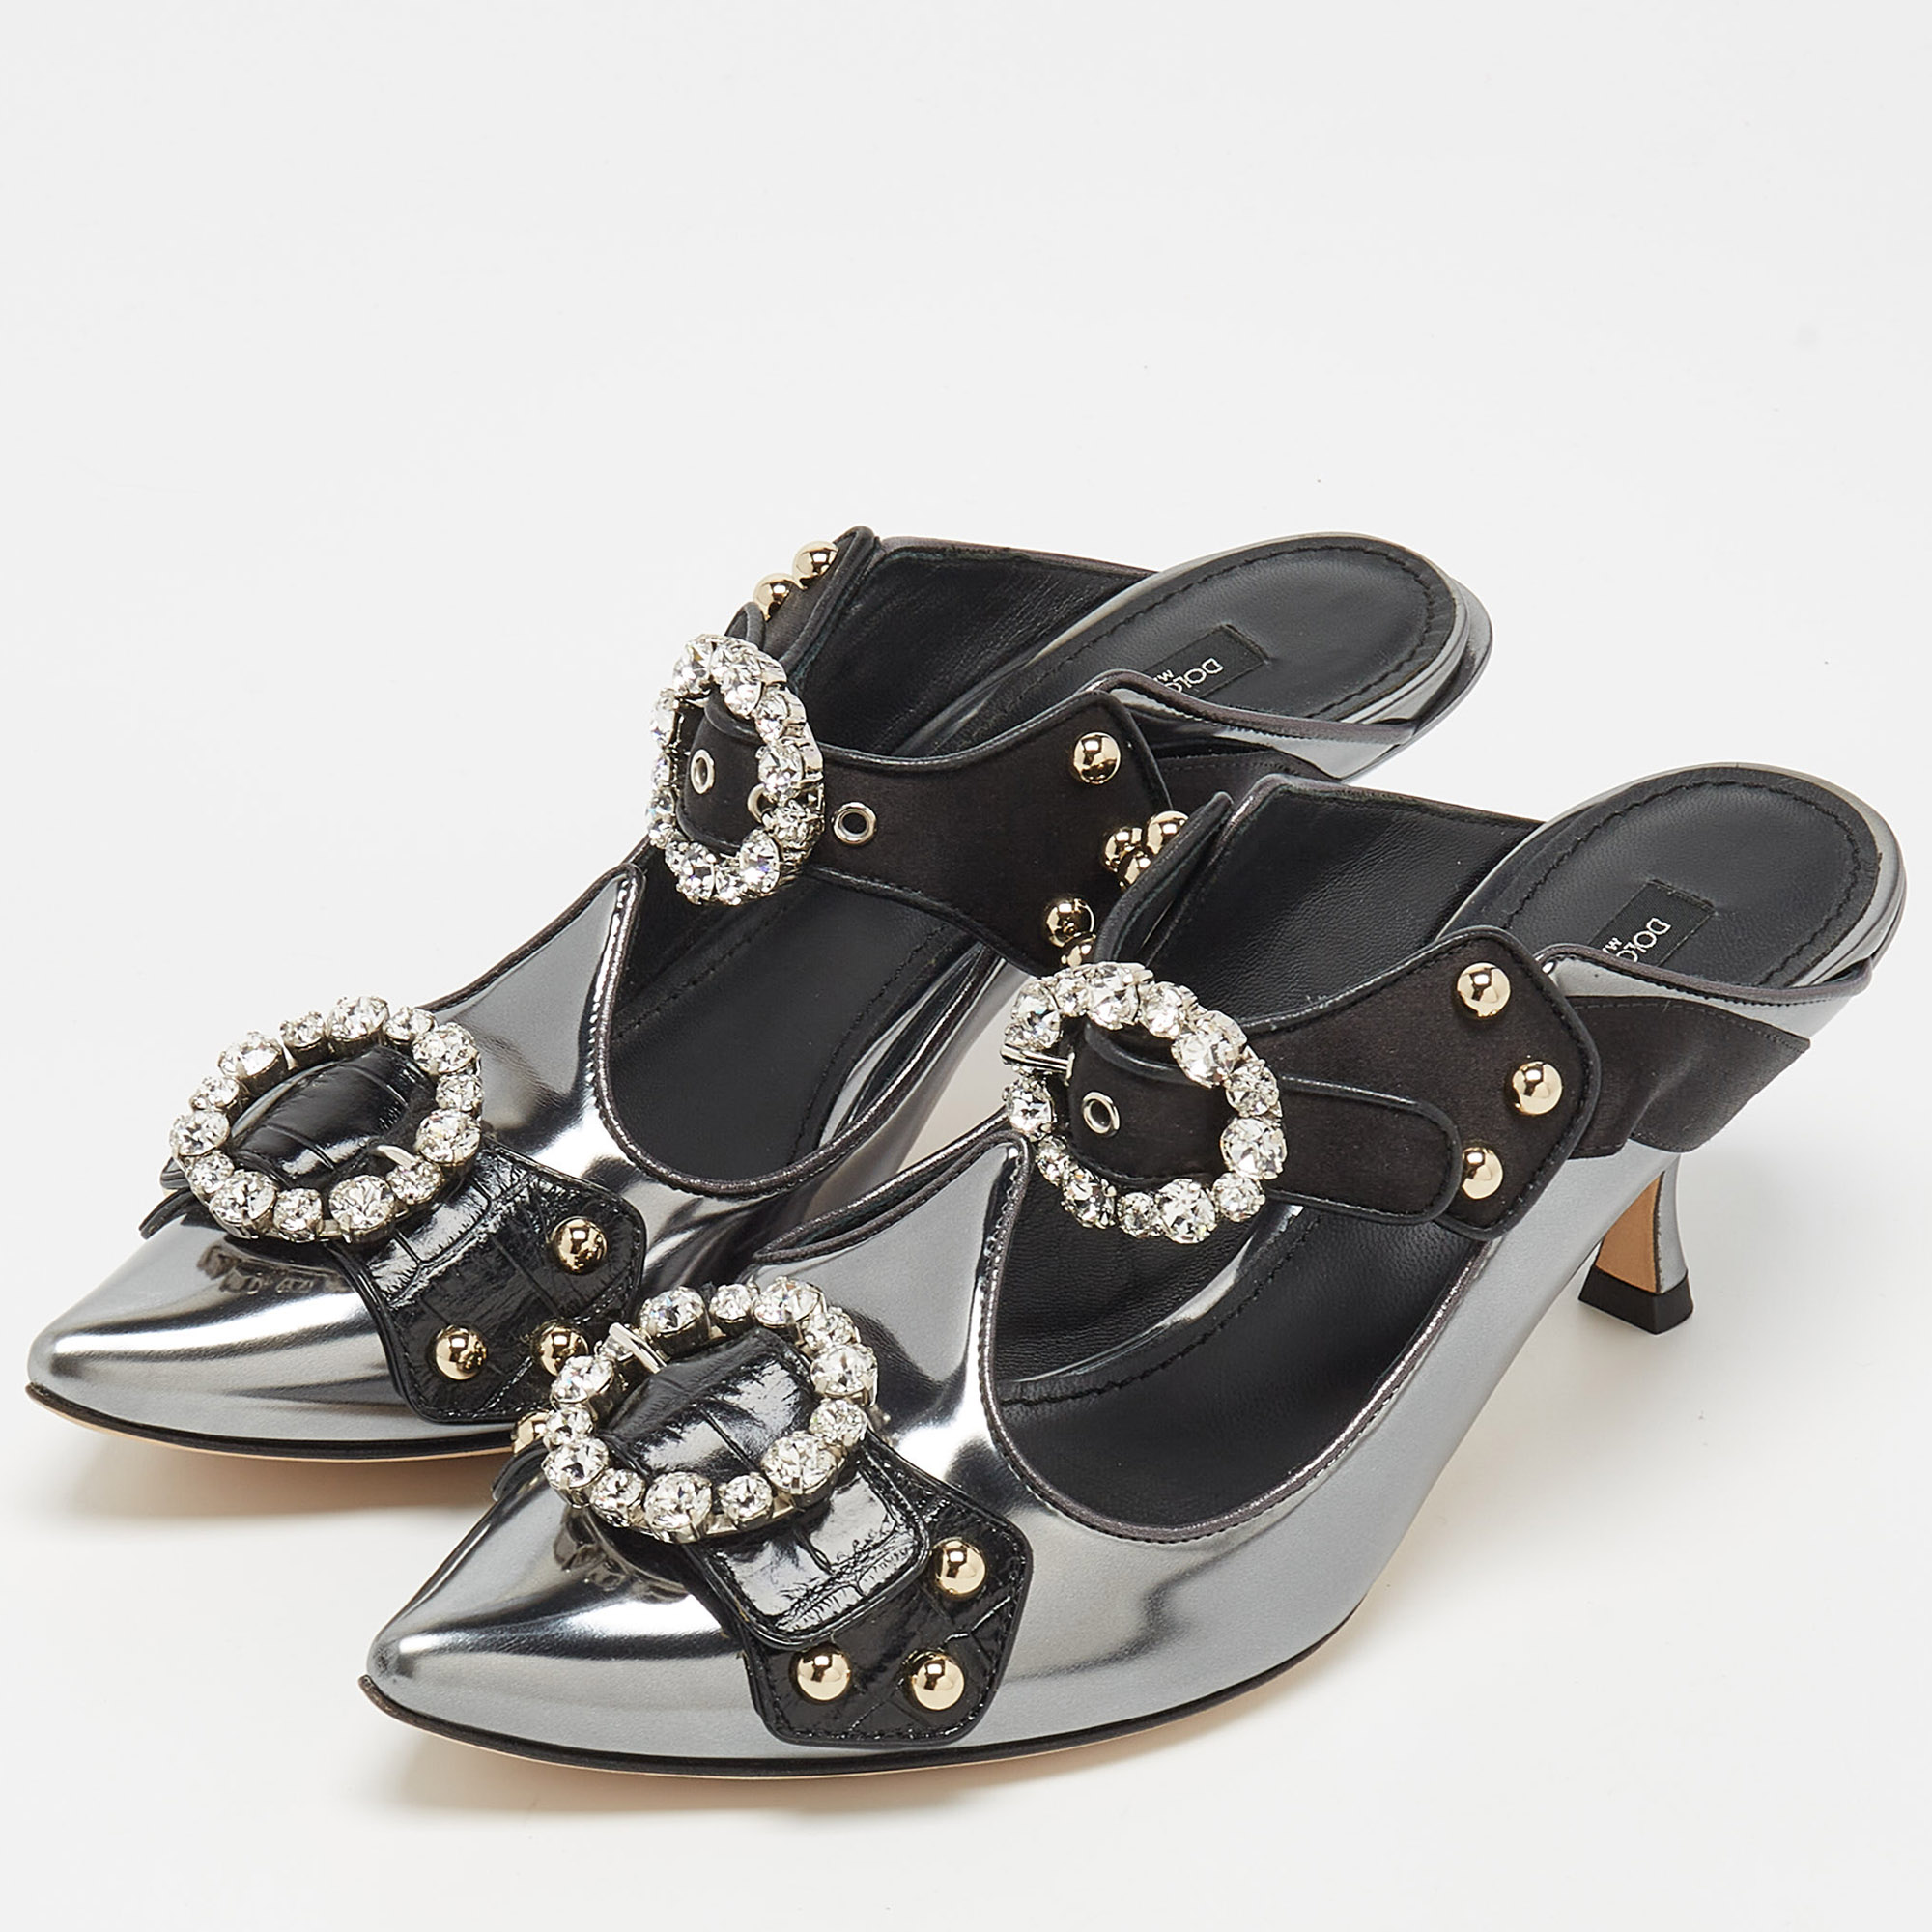 

Dolce & Gabbana Metallic Silver/Black Leather Crystal Embellished Cutout Detail Mules Size